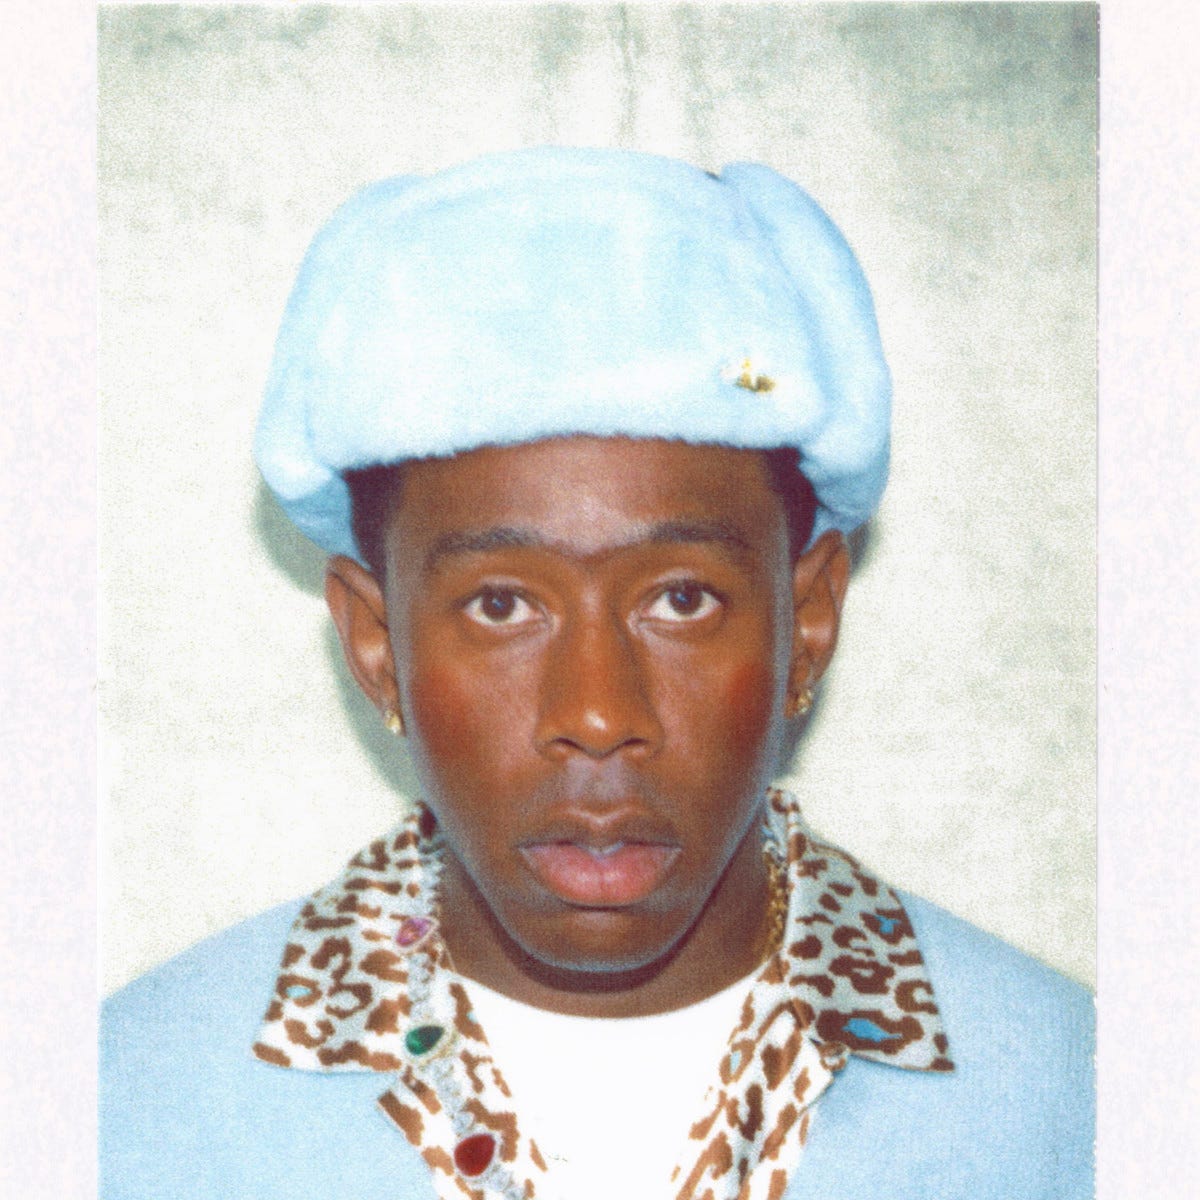 Tyler, the Creator: 'Call Me If You Get Lost' rapper's fashion looks